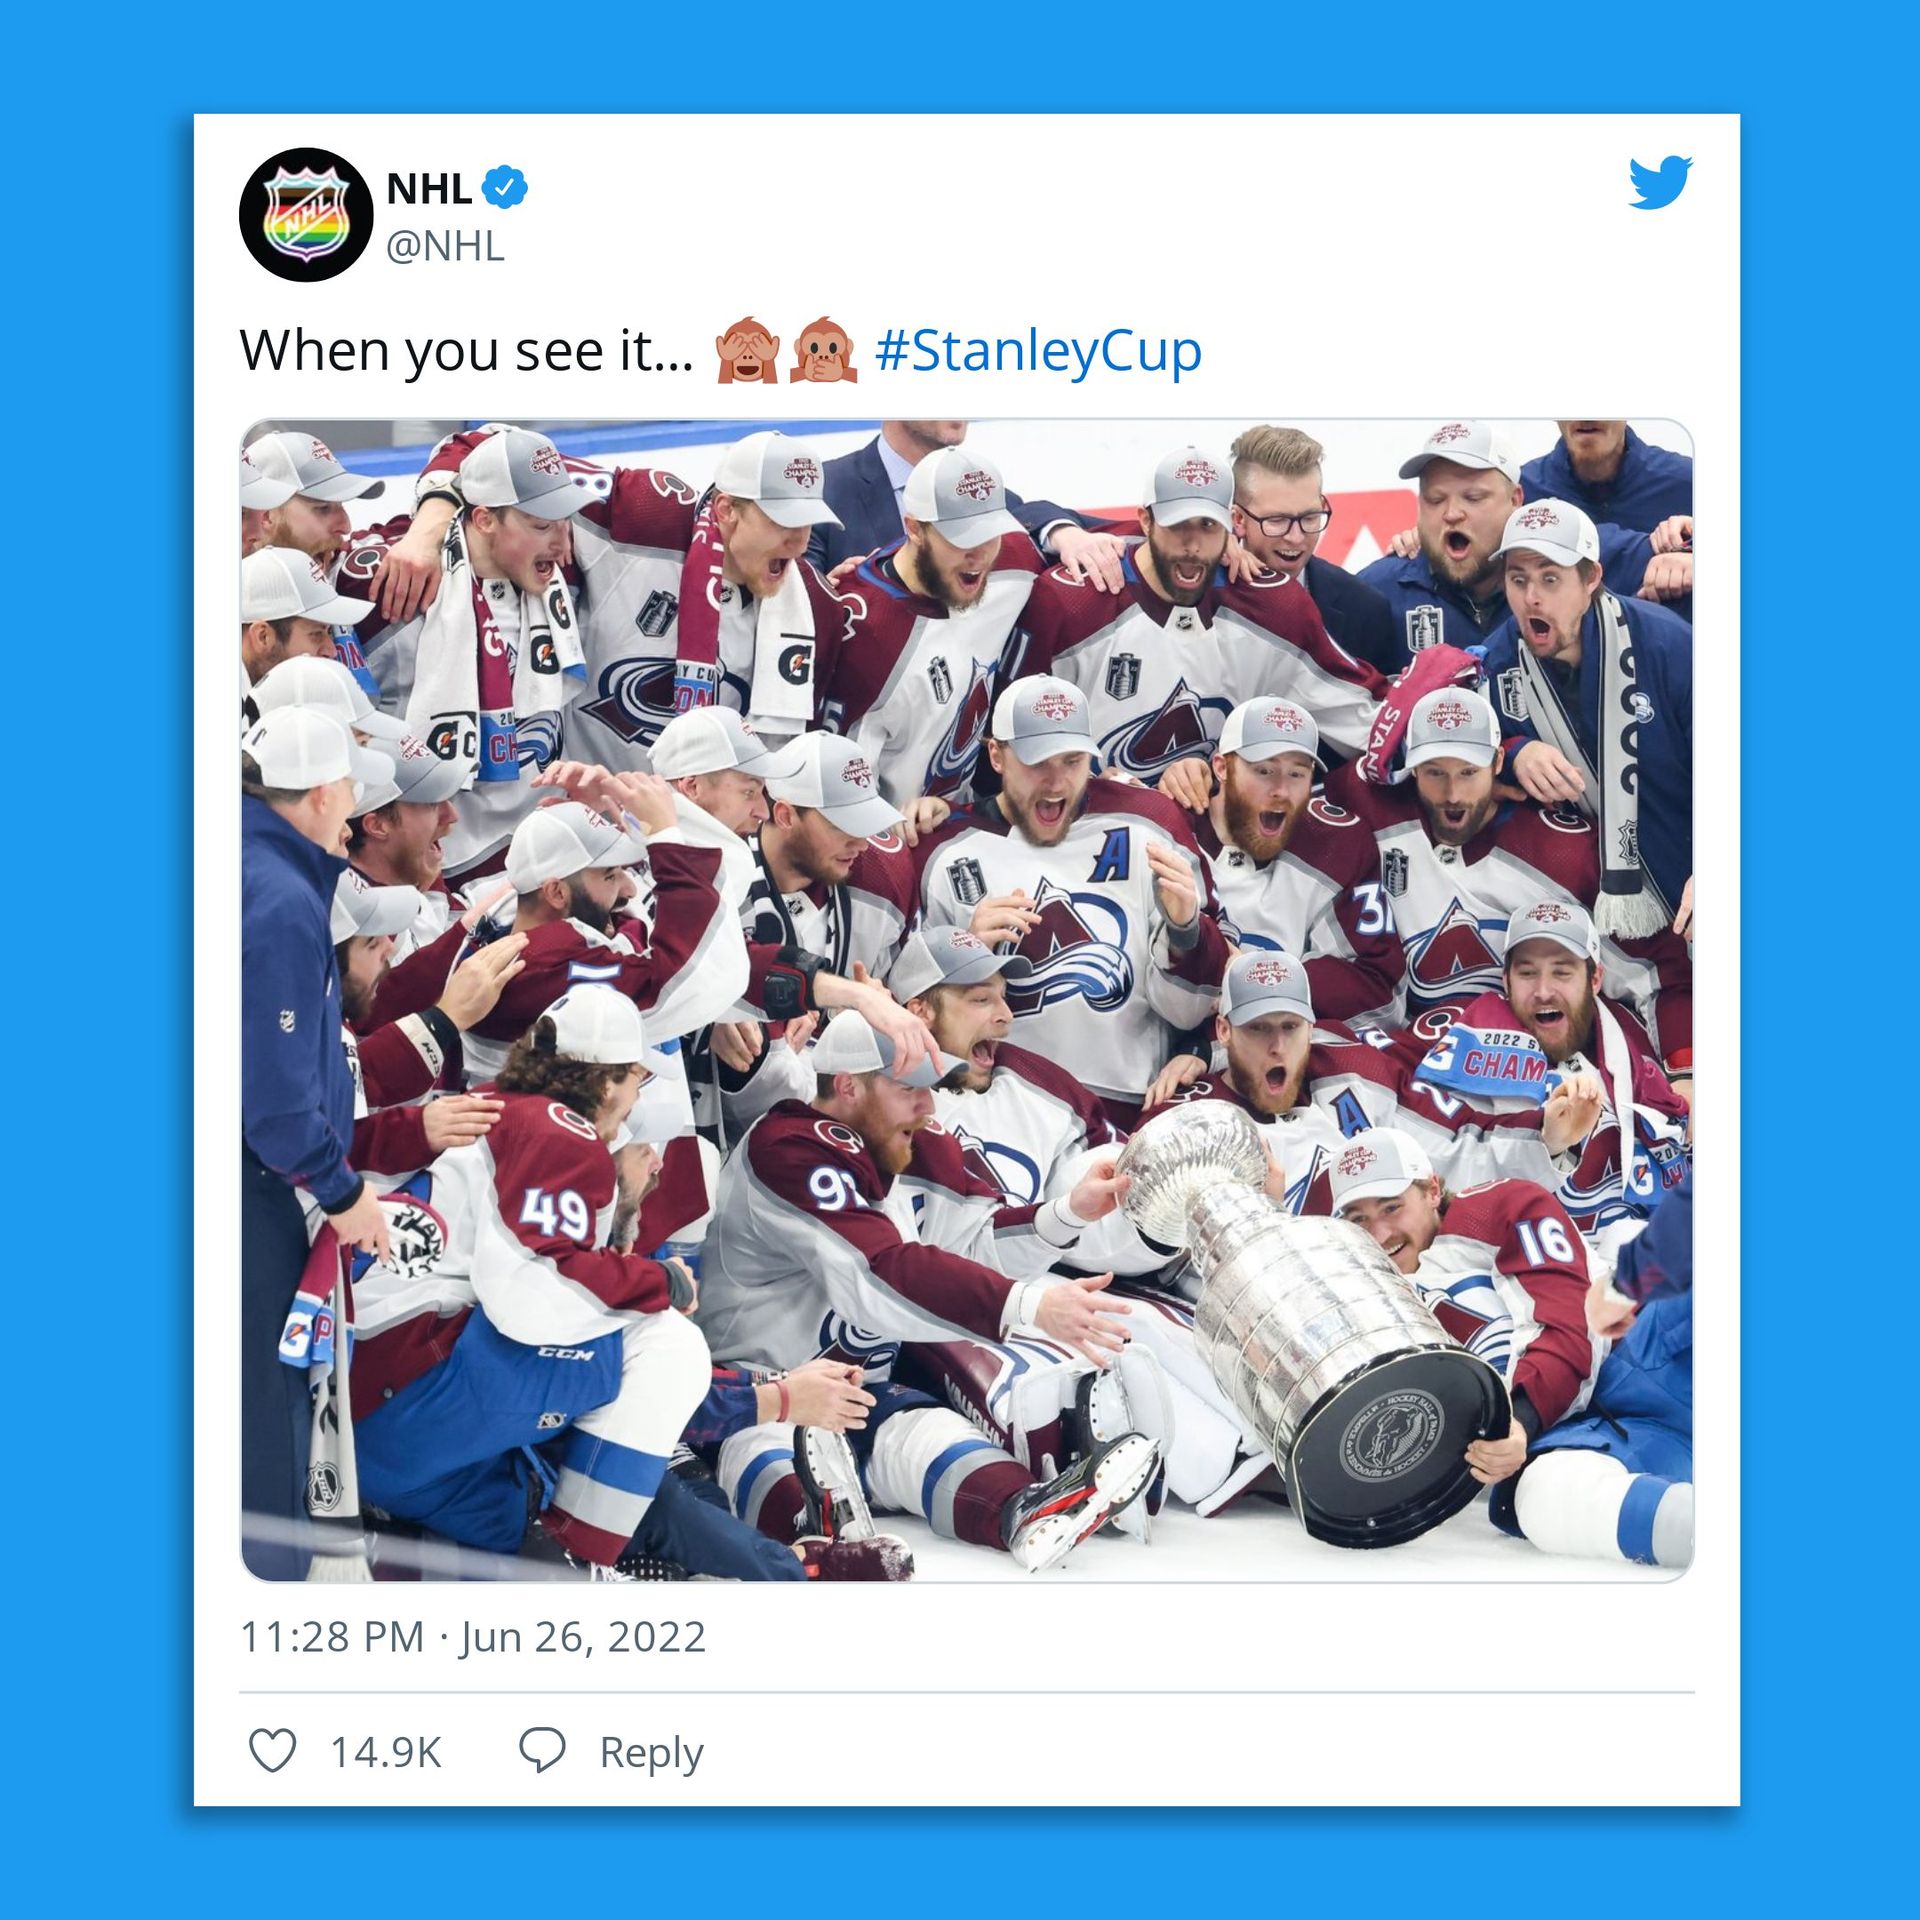 Colorado Avalanche Dent Stanley Cup Within Minutes After Winning